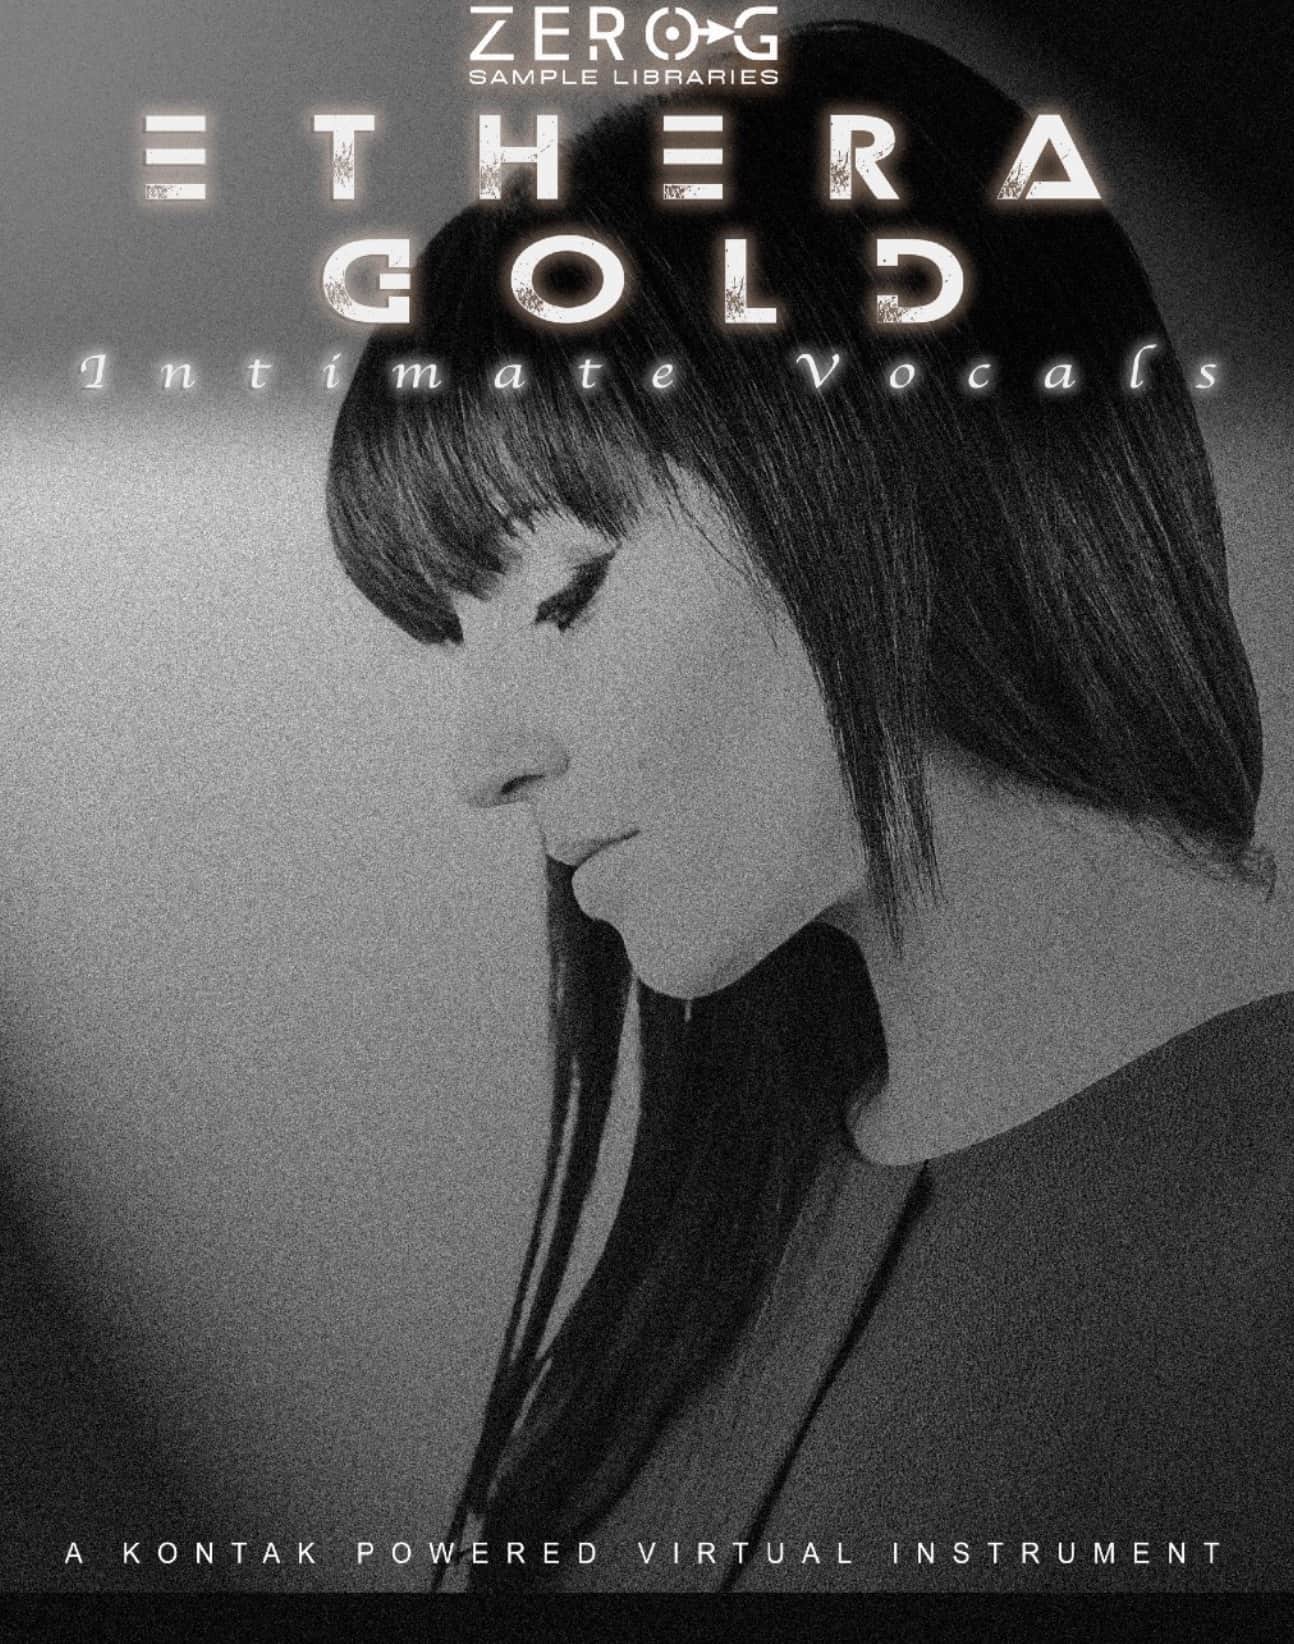 ETHERA Gold Intimate Vocals Released